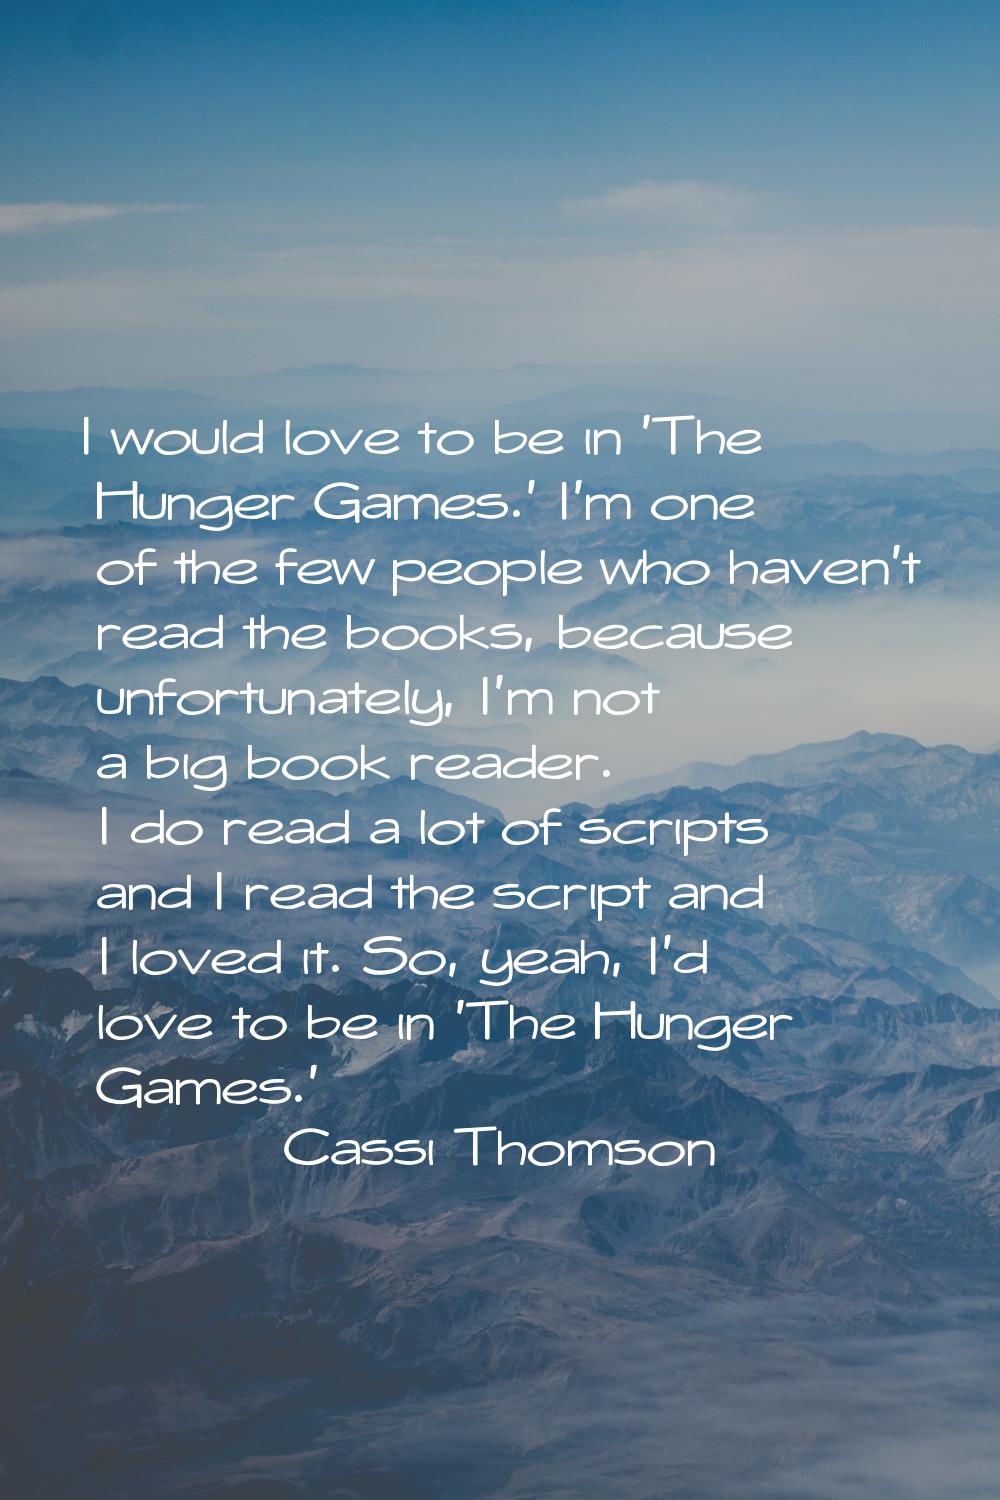 I would love to be in 'The Hunger Games.' I'm one of the few people who haven't read the books, bec